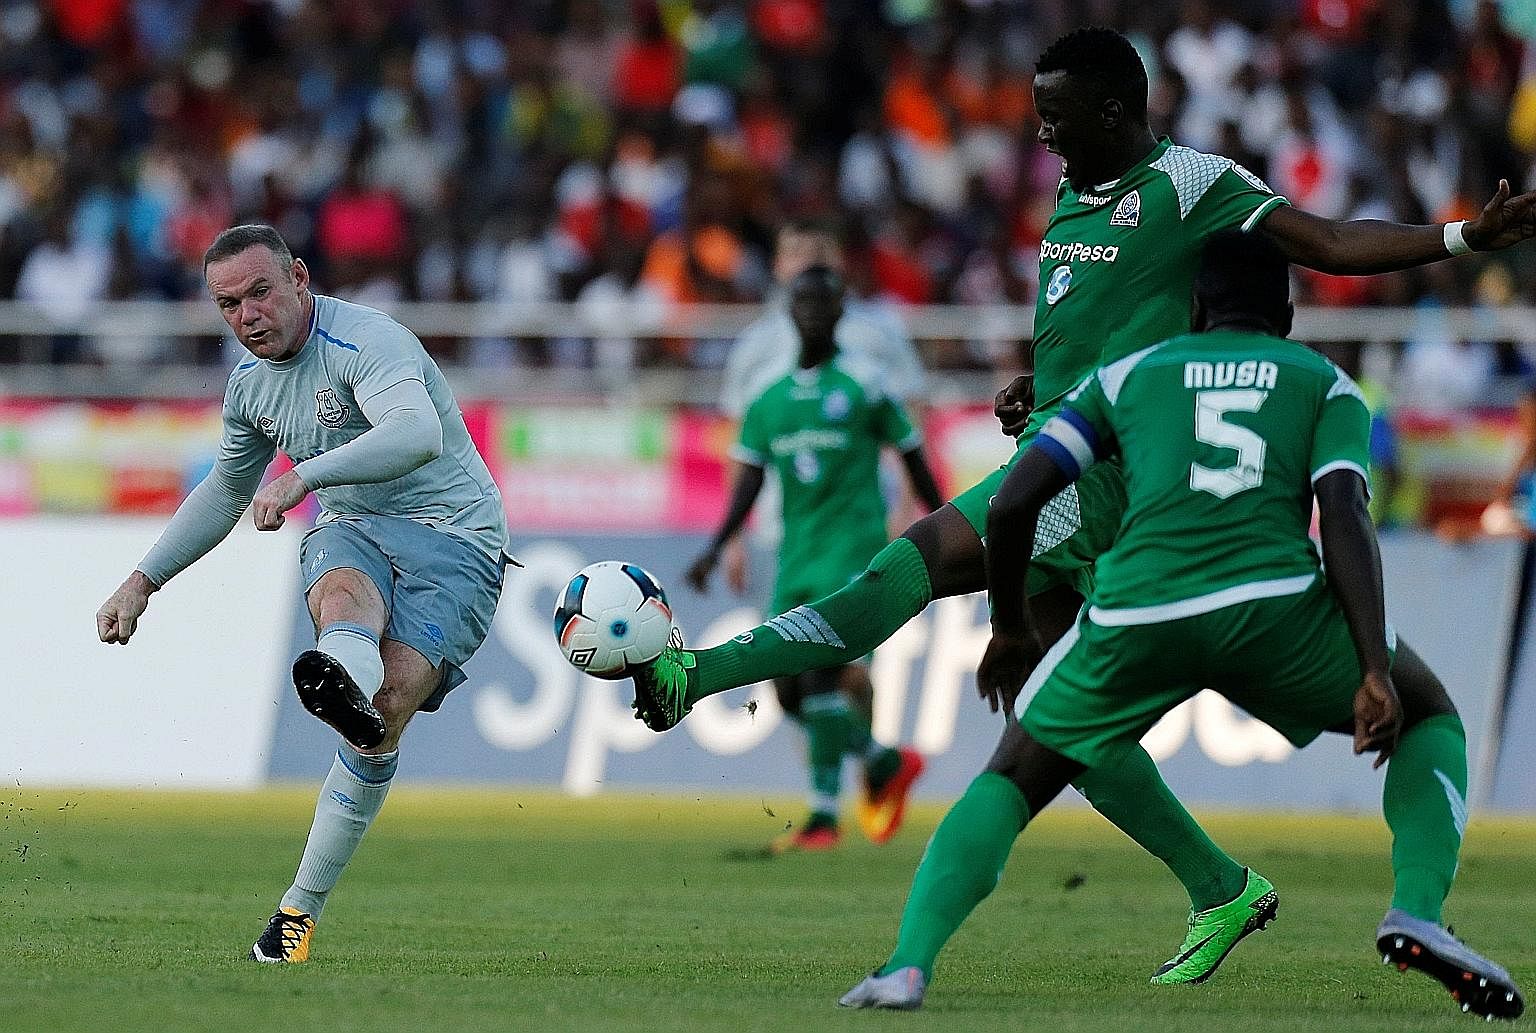 Wayne Rooney scoring Everton's first goal in their pre-season friendly against Kenya's Gor Mahia on Thursday. The Premier League club won 2-1 with teenager Kieran Dowell netting the winner. Rooney aside, Everton have been spending big this summer, si